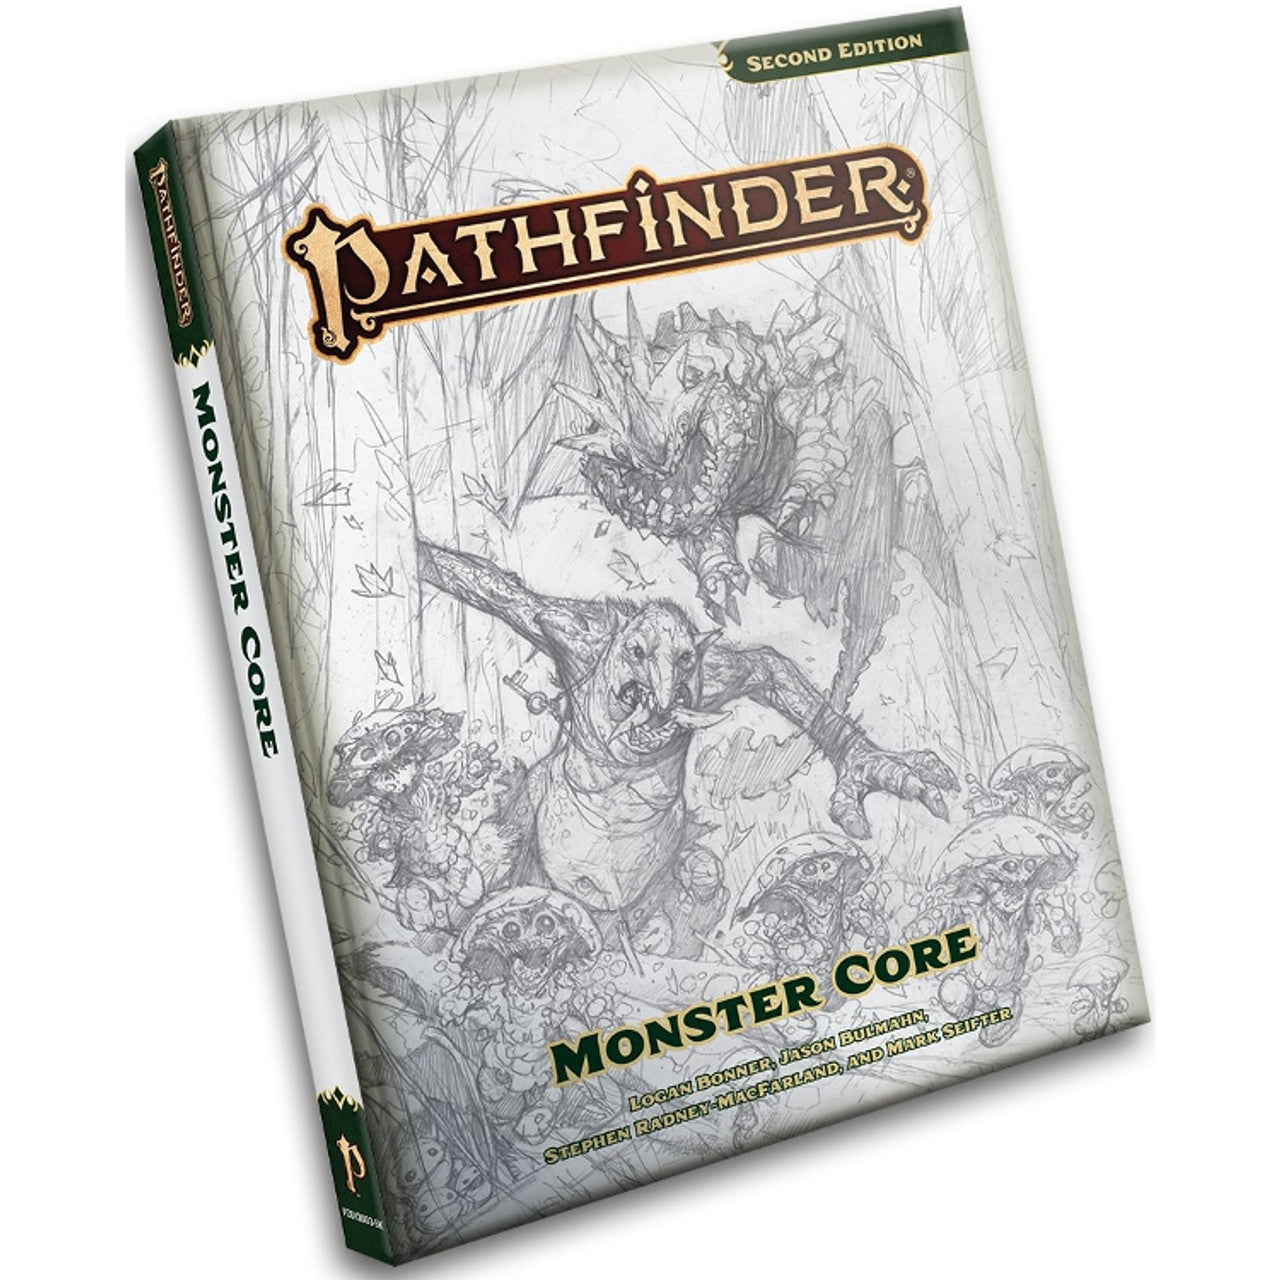 Pathfinder 2E: Monster Core: Sketch Cover